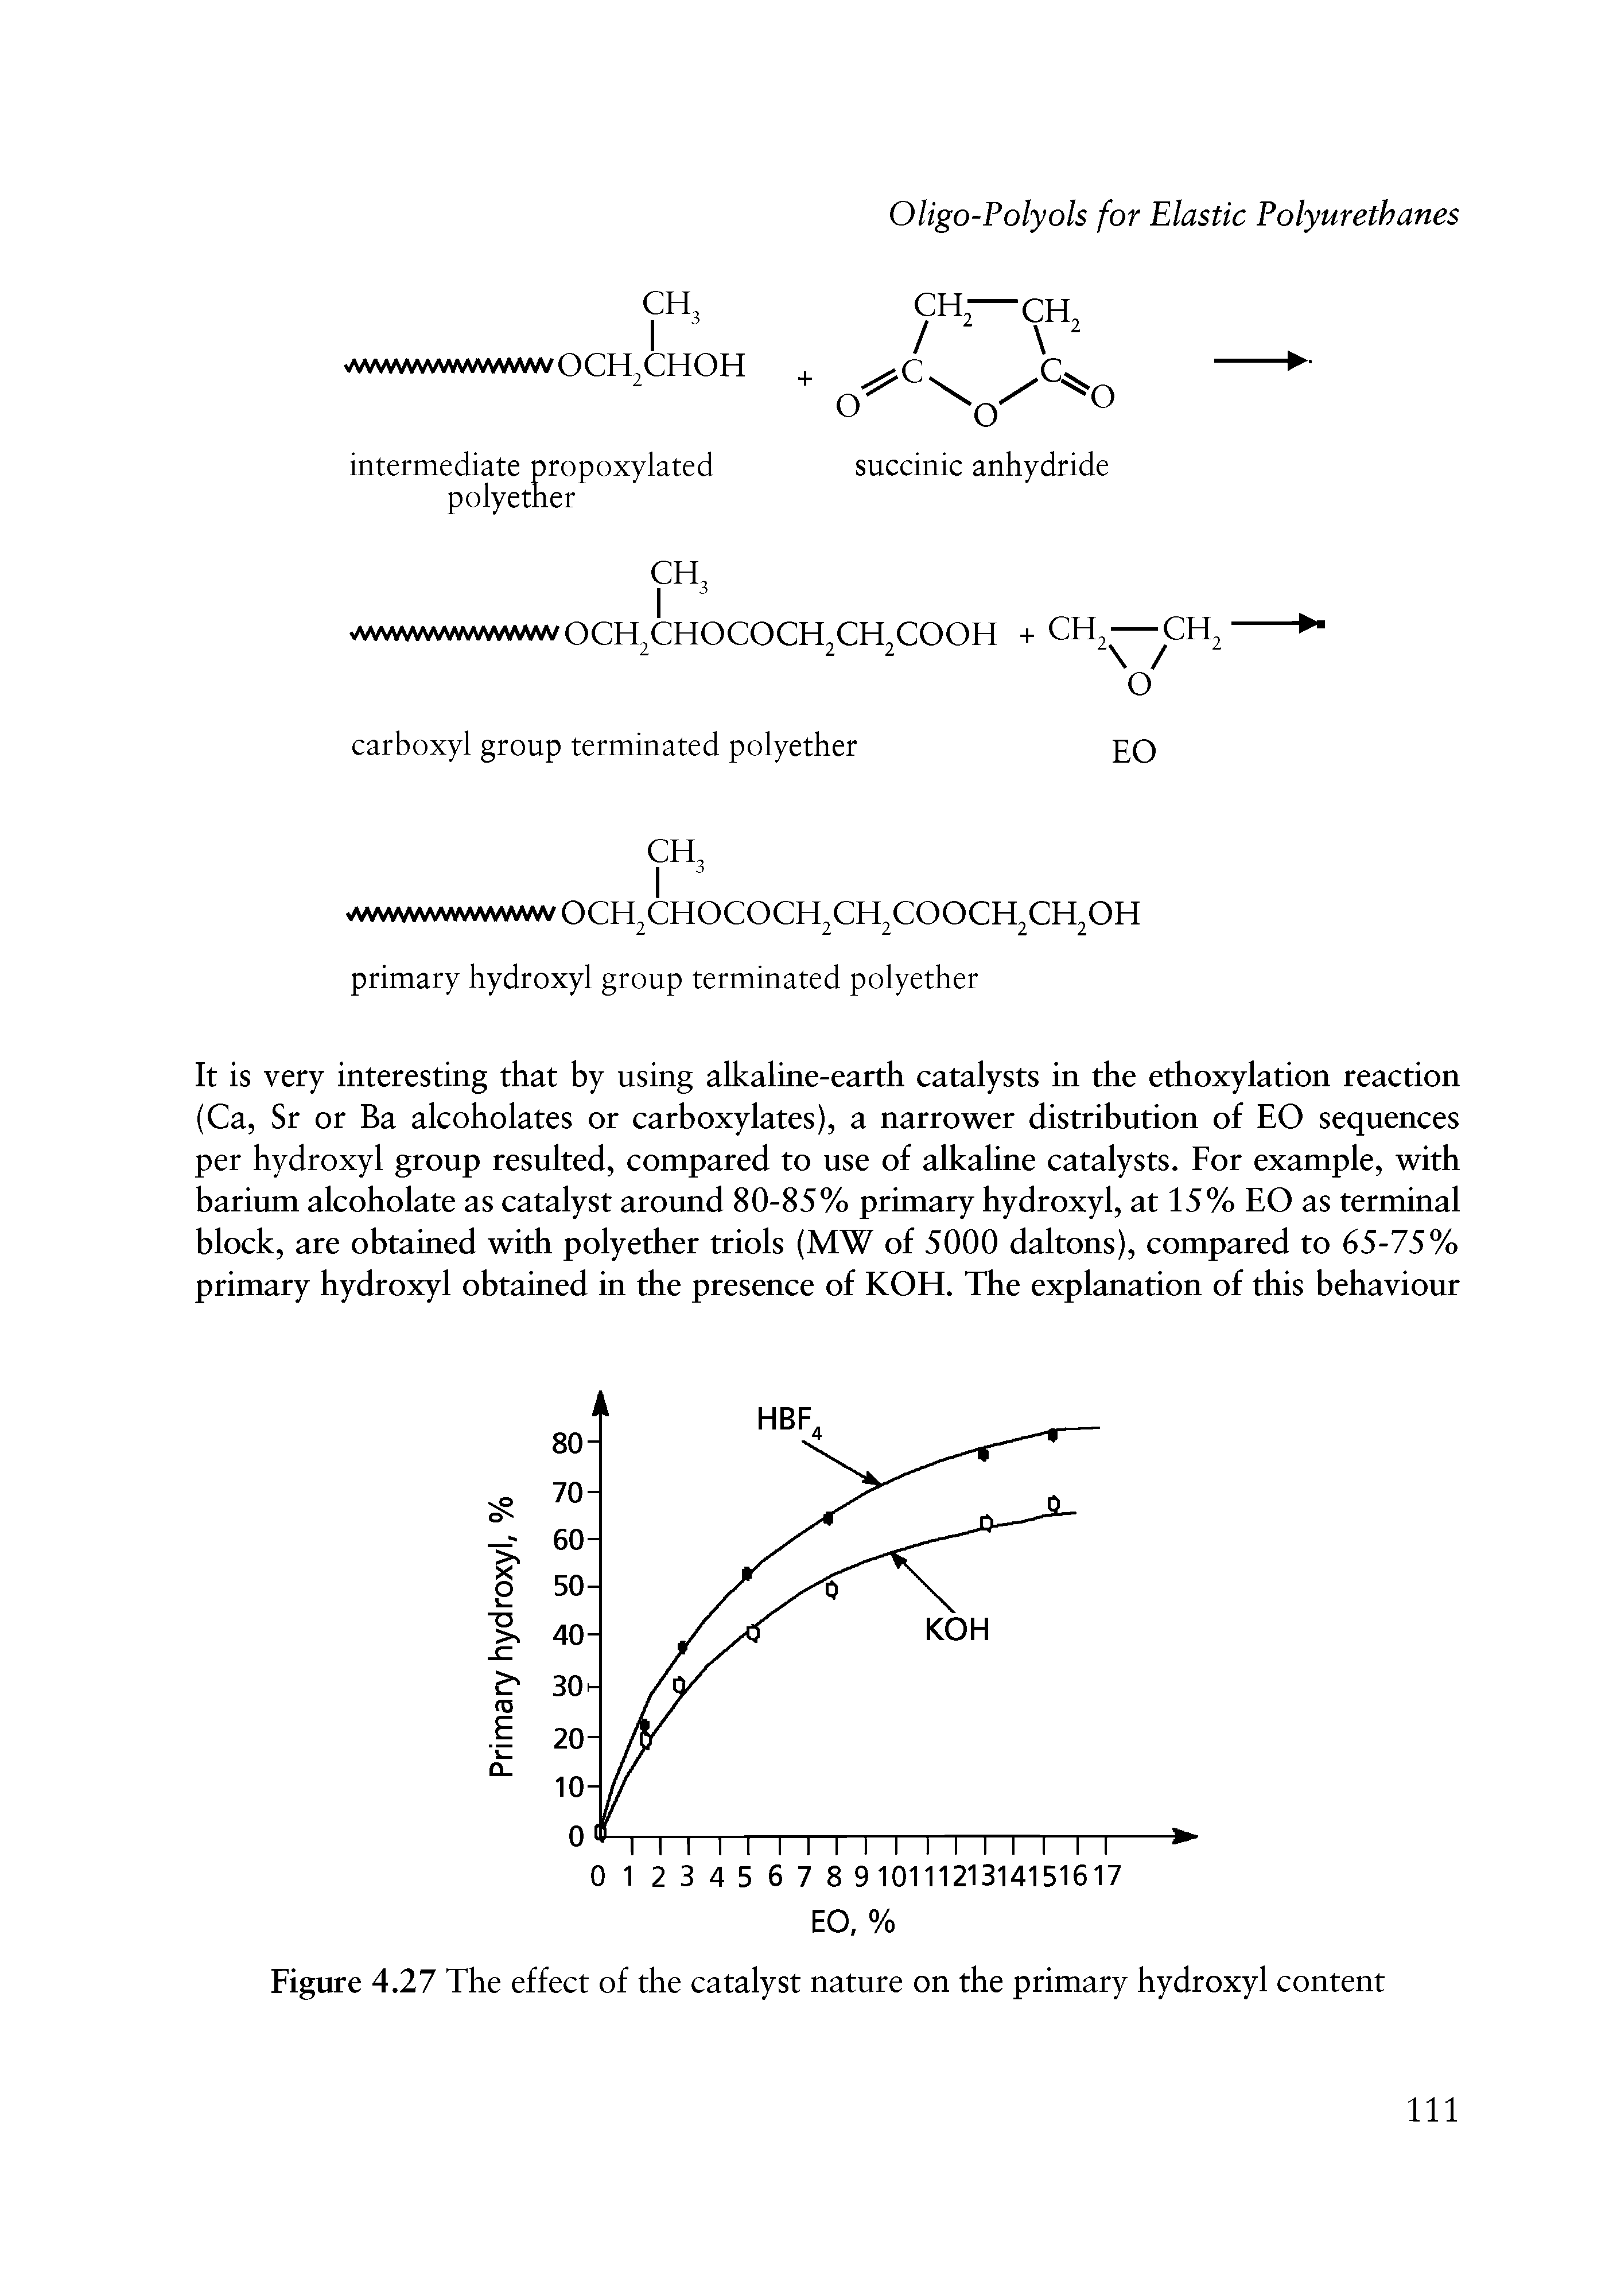 Figure 4.27 The effect of the catalyst nature on the primary hydroxyl content...